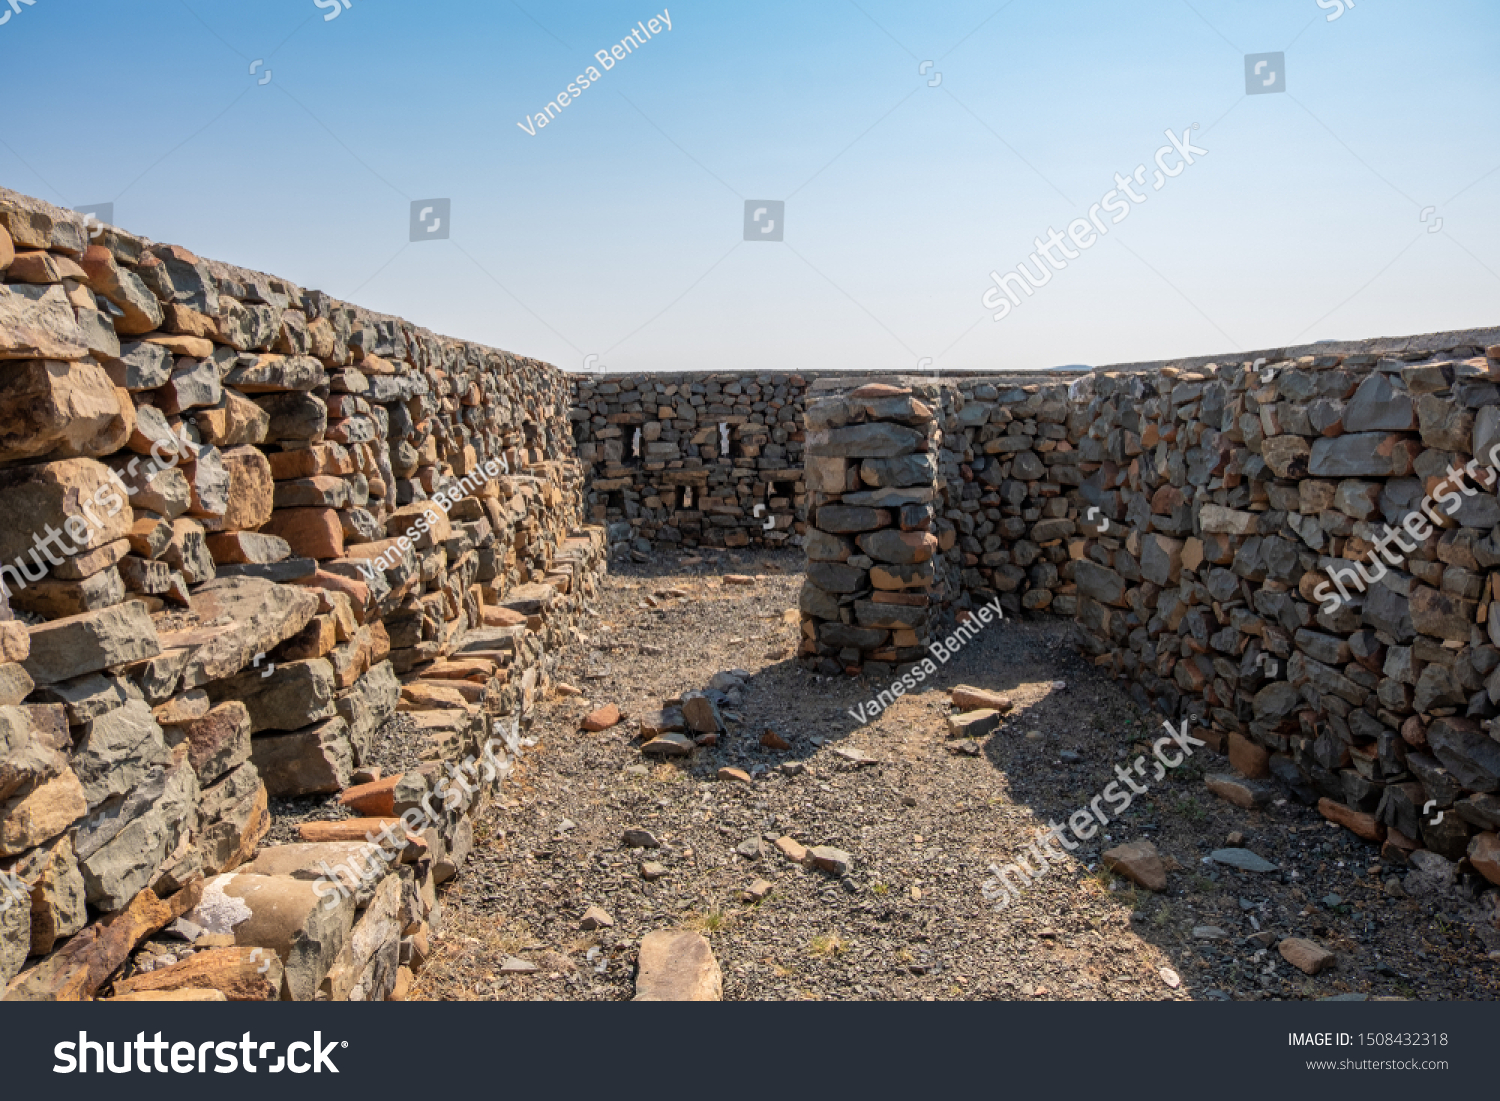 Remains of the old Anglo-Boer war fort in Jansenville, South Africa #1508432318